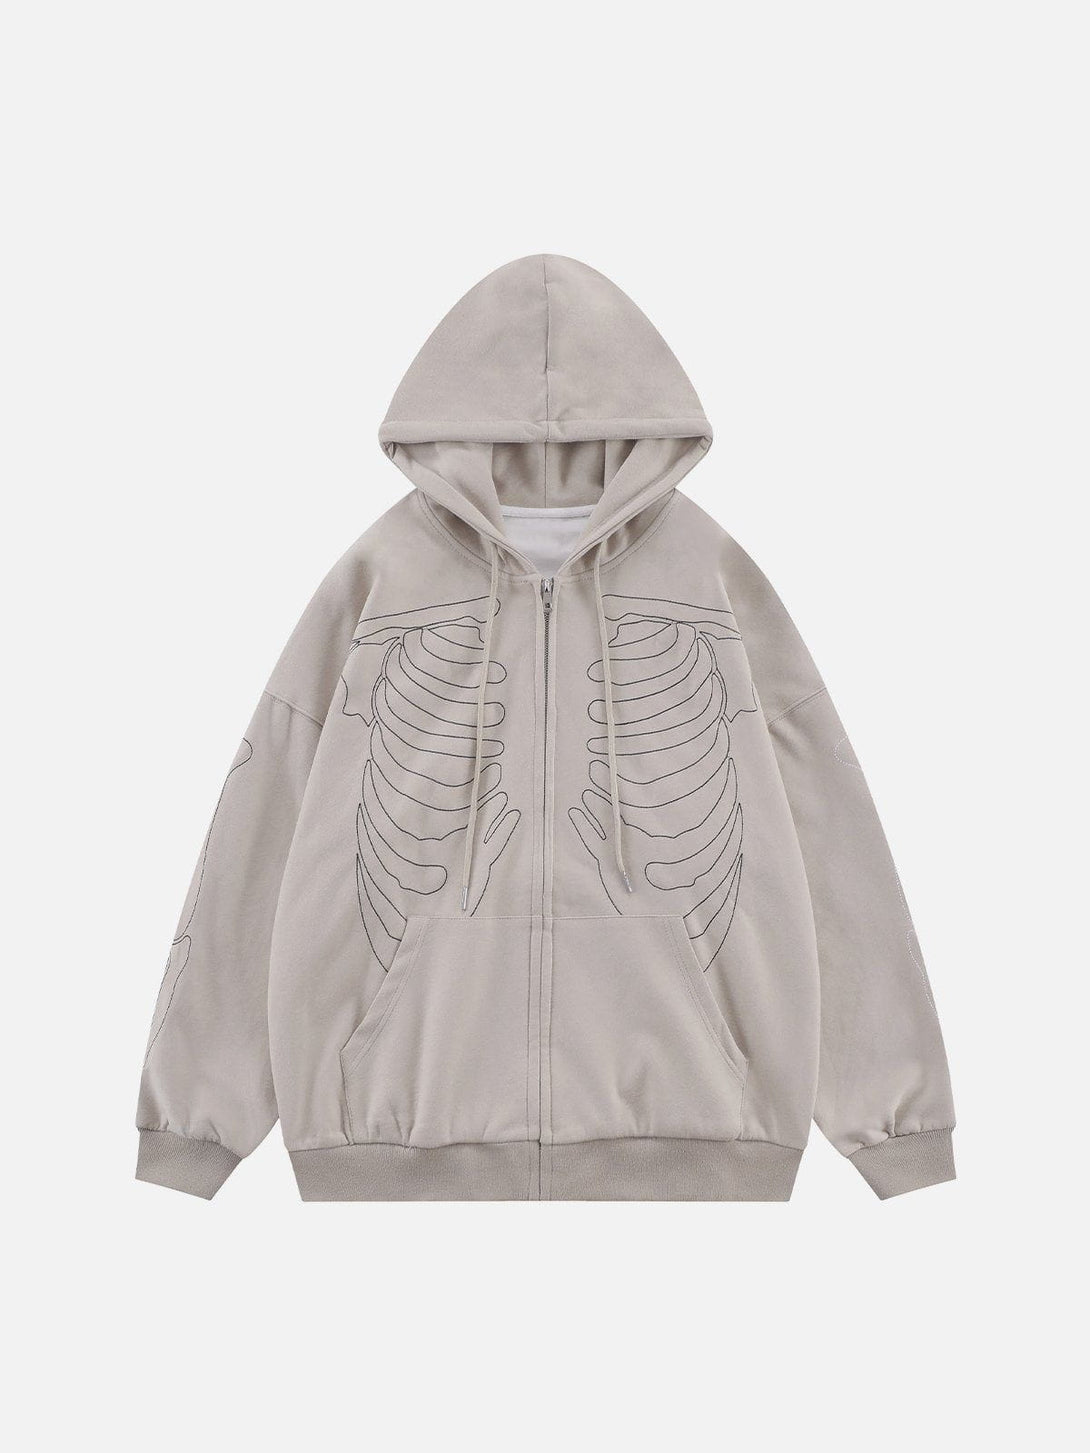 Levefly - Embroidery Skeleton Zip Up Hoodie - Streetwear Fashion - levefly.com